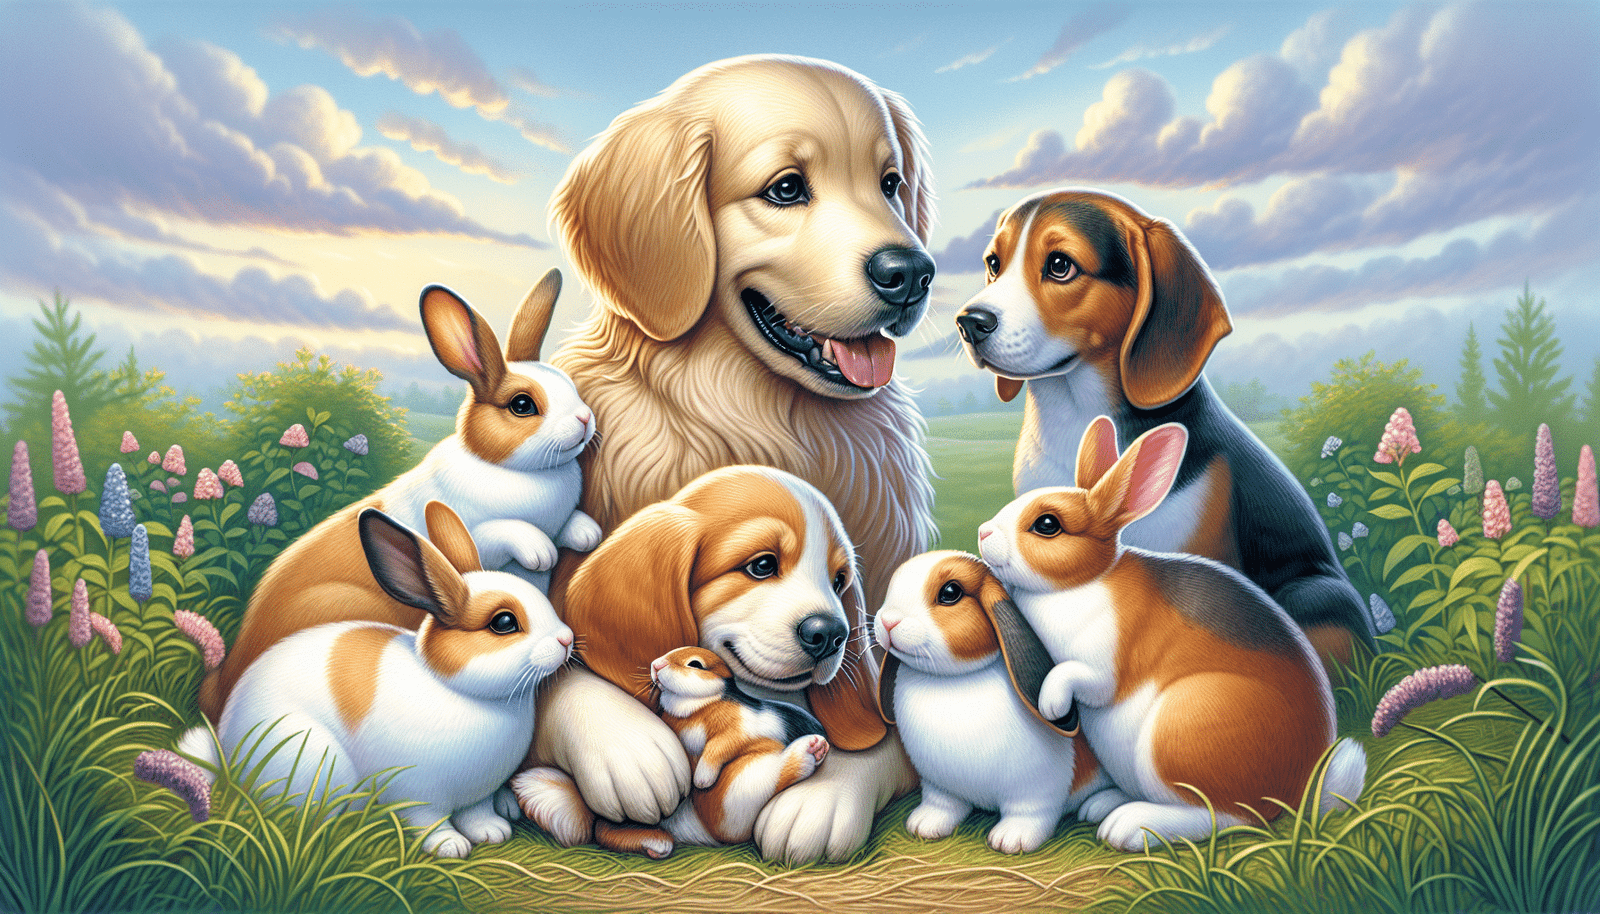 Illustration of various dog breeds with a rabbit in a harmonious setting